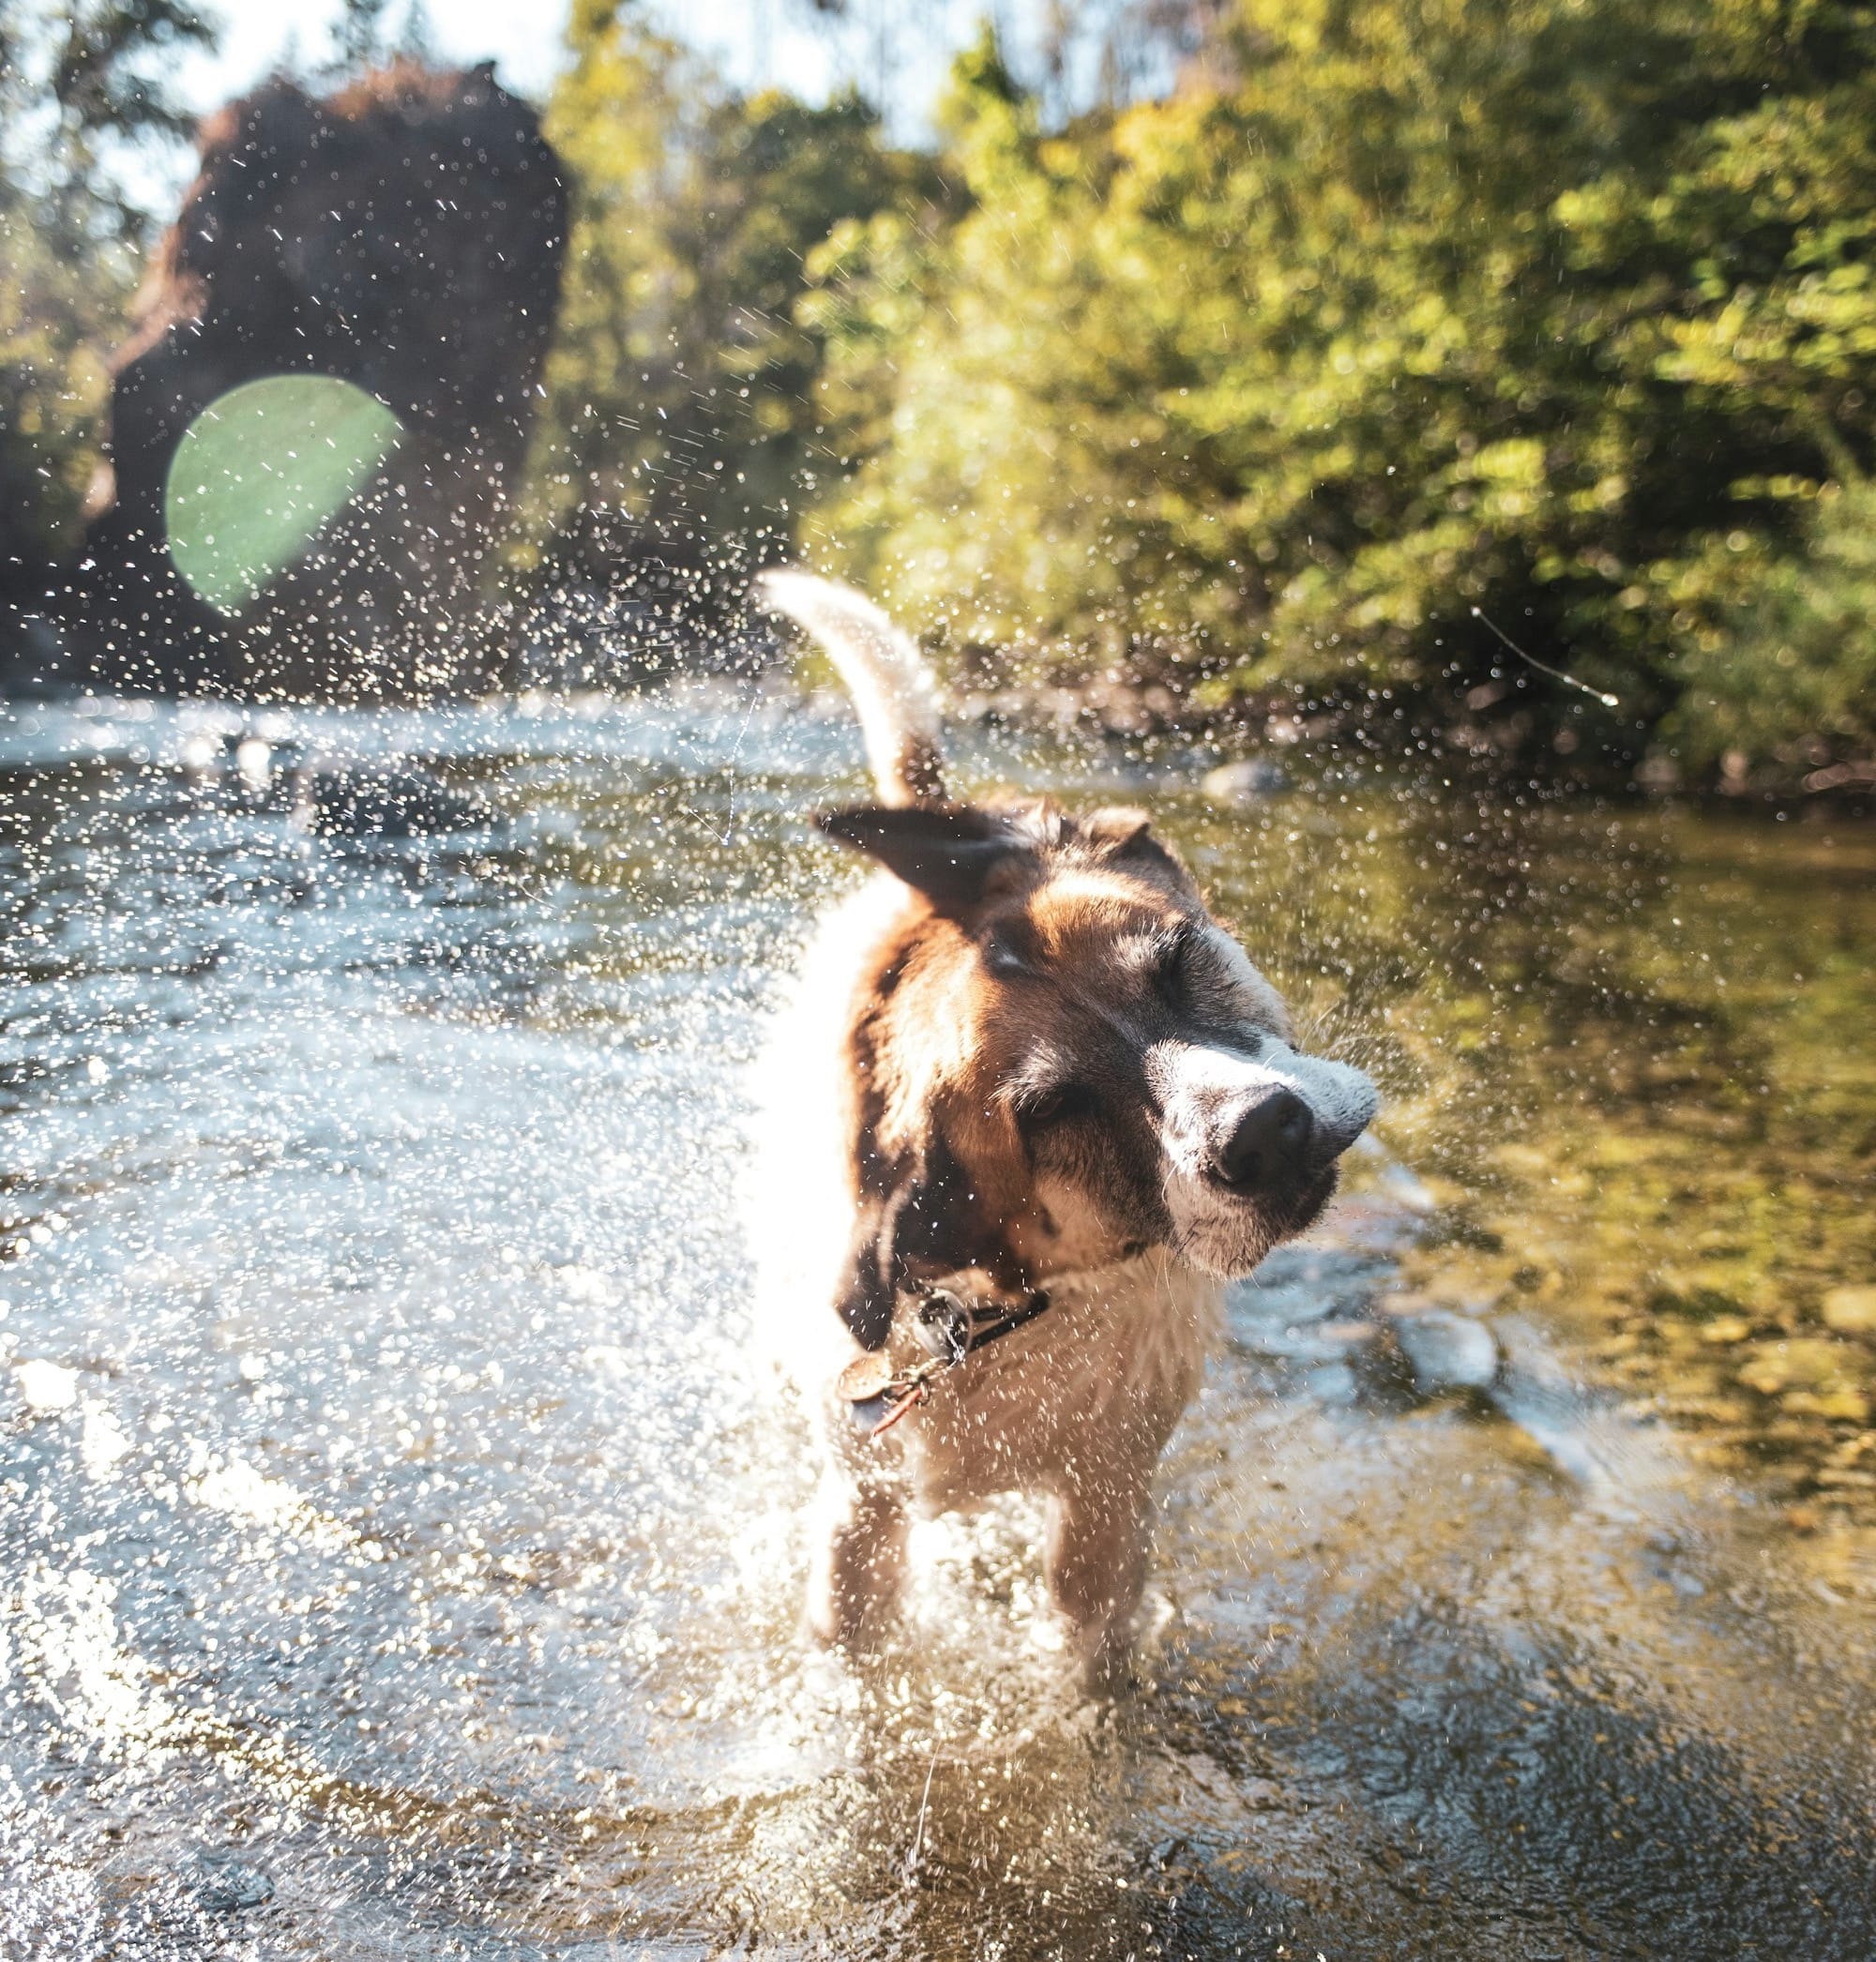 Dog playing in the river during camping trip